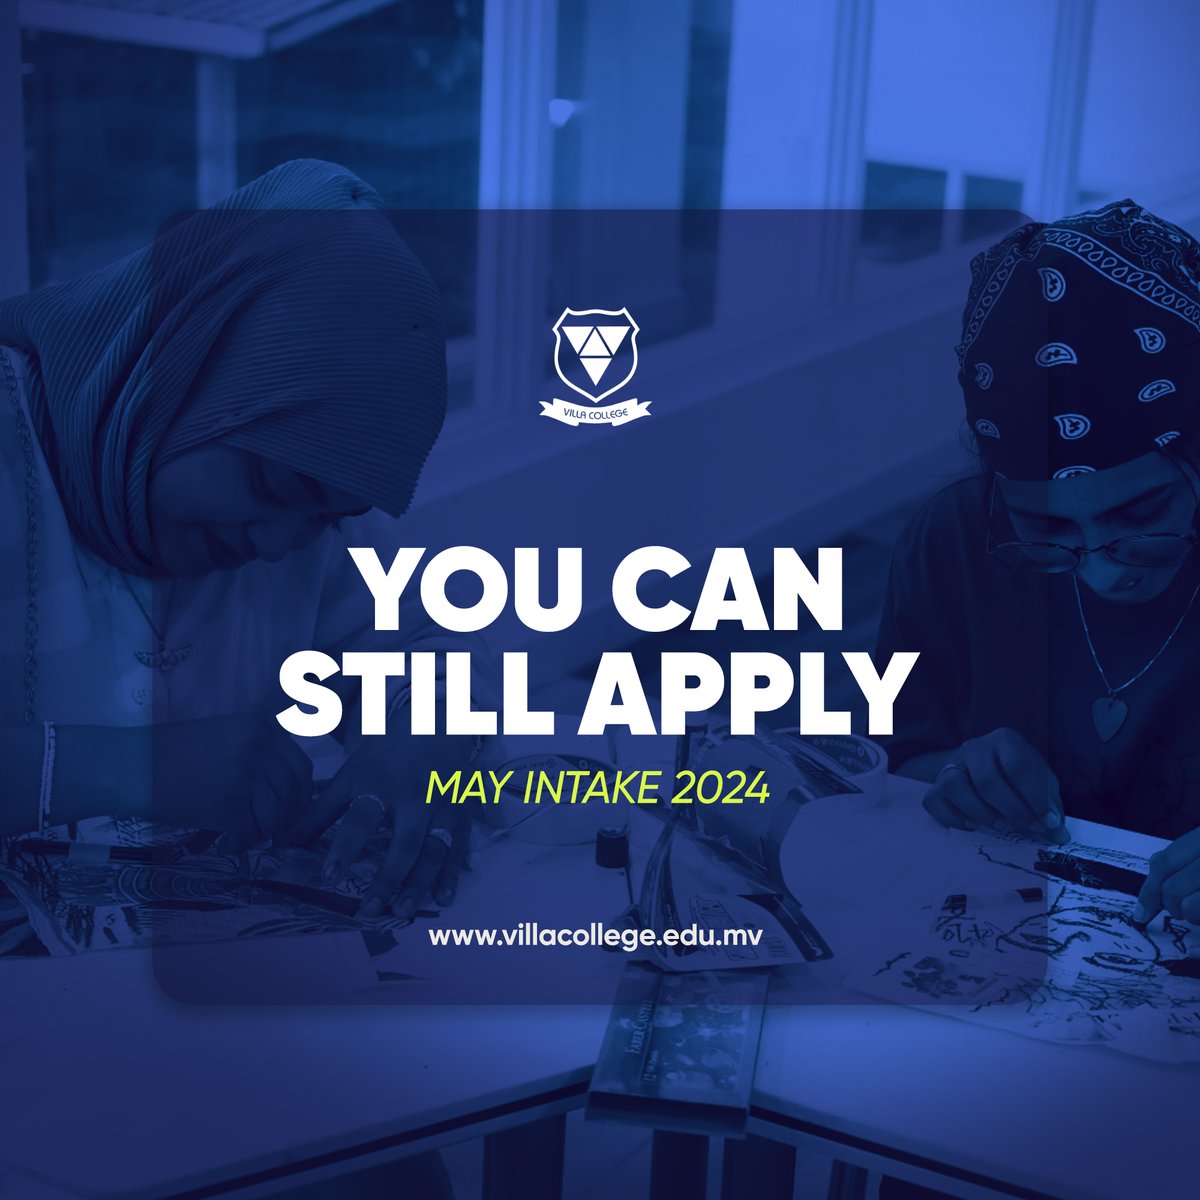 There's still time to apply!! Study at Villa College this May Intake 2024. myvc.villacollege.edu.mv/applicationfor… #MayIntake2024 #studyatvc #transformyourlifewithvillacollege